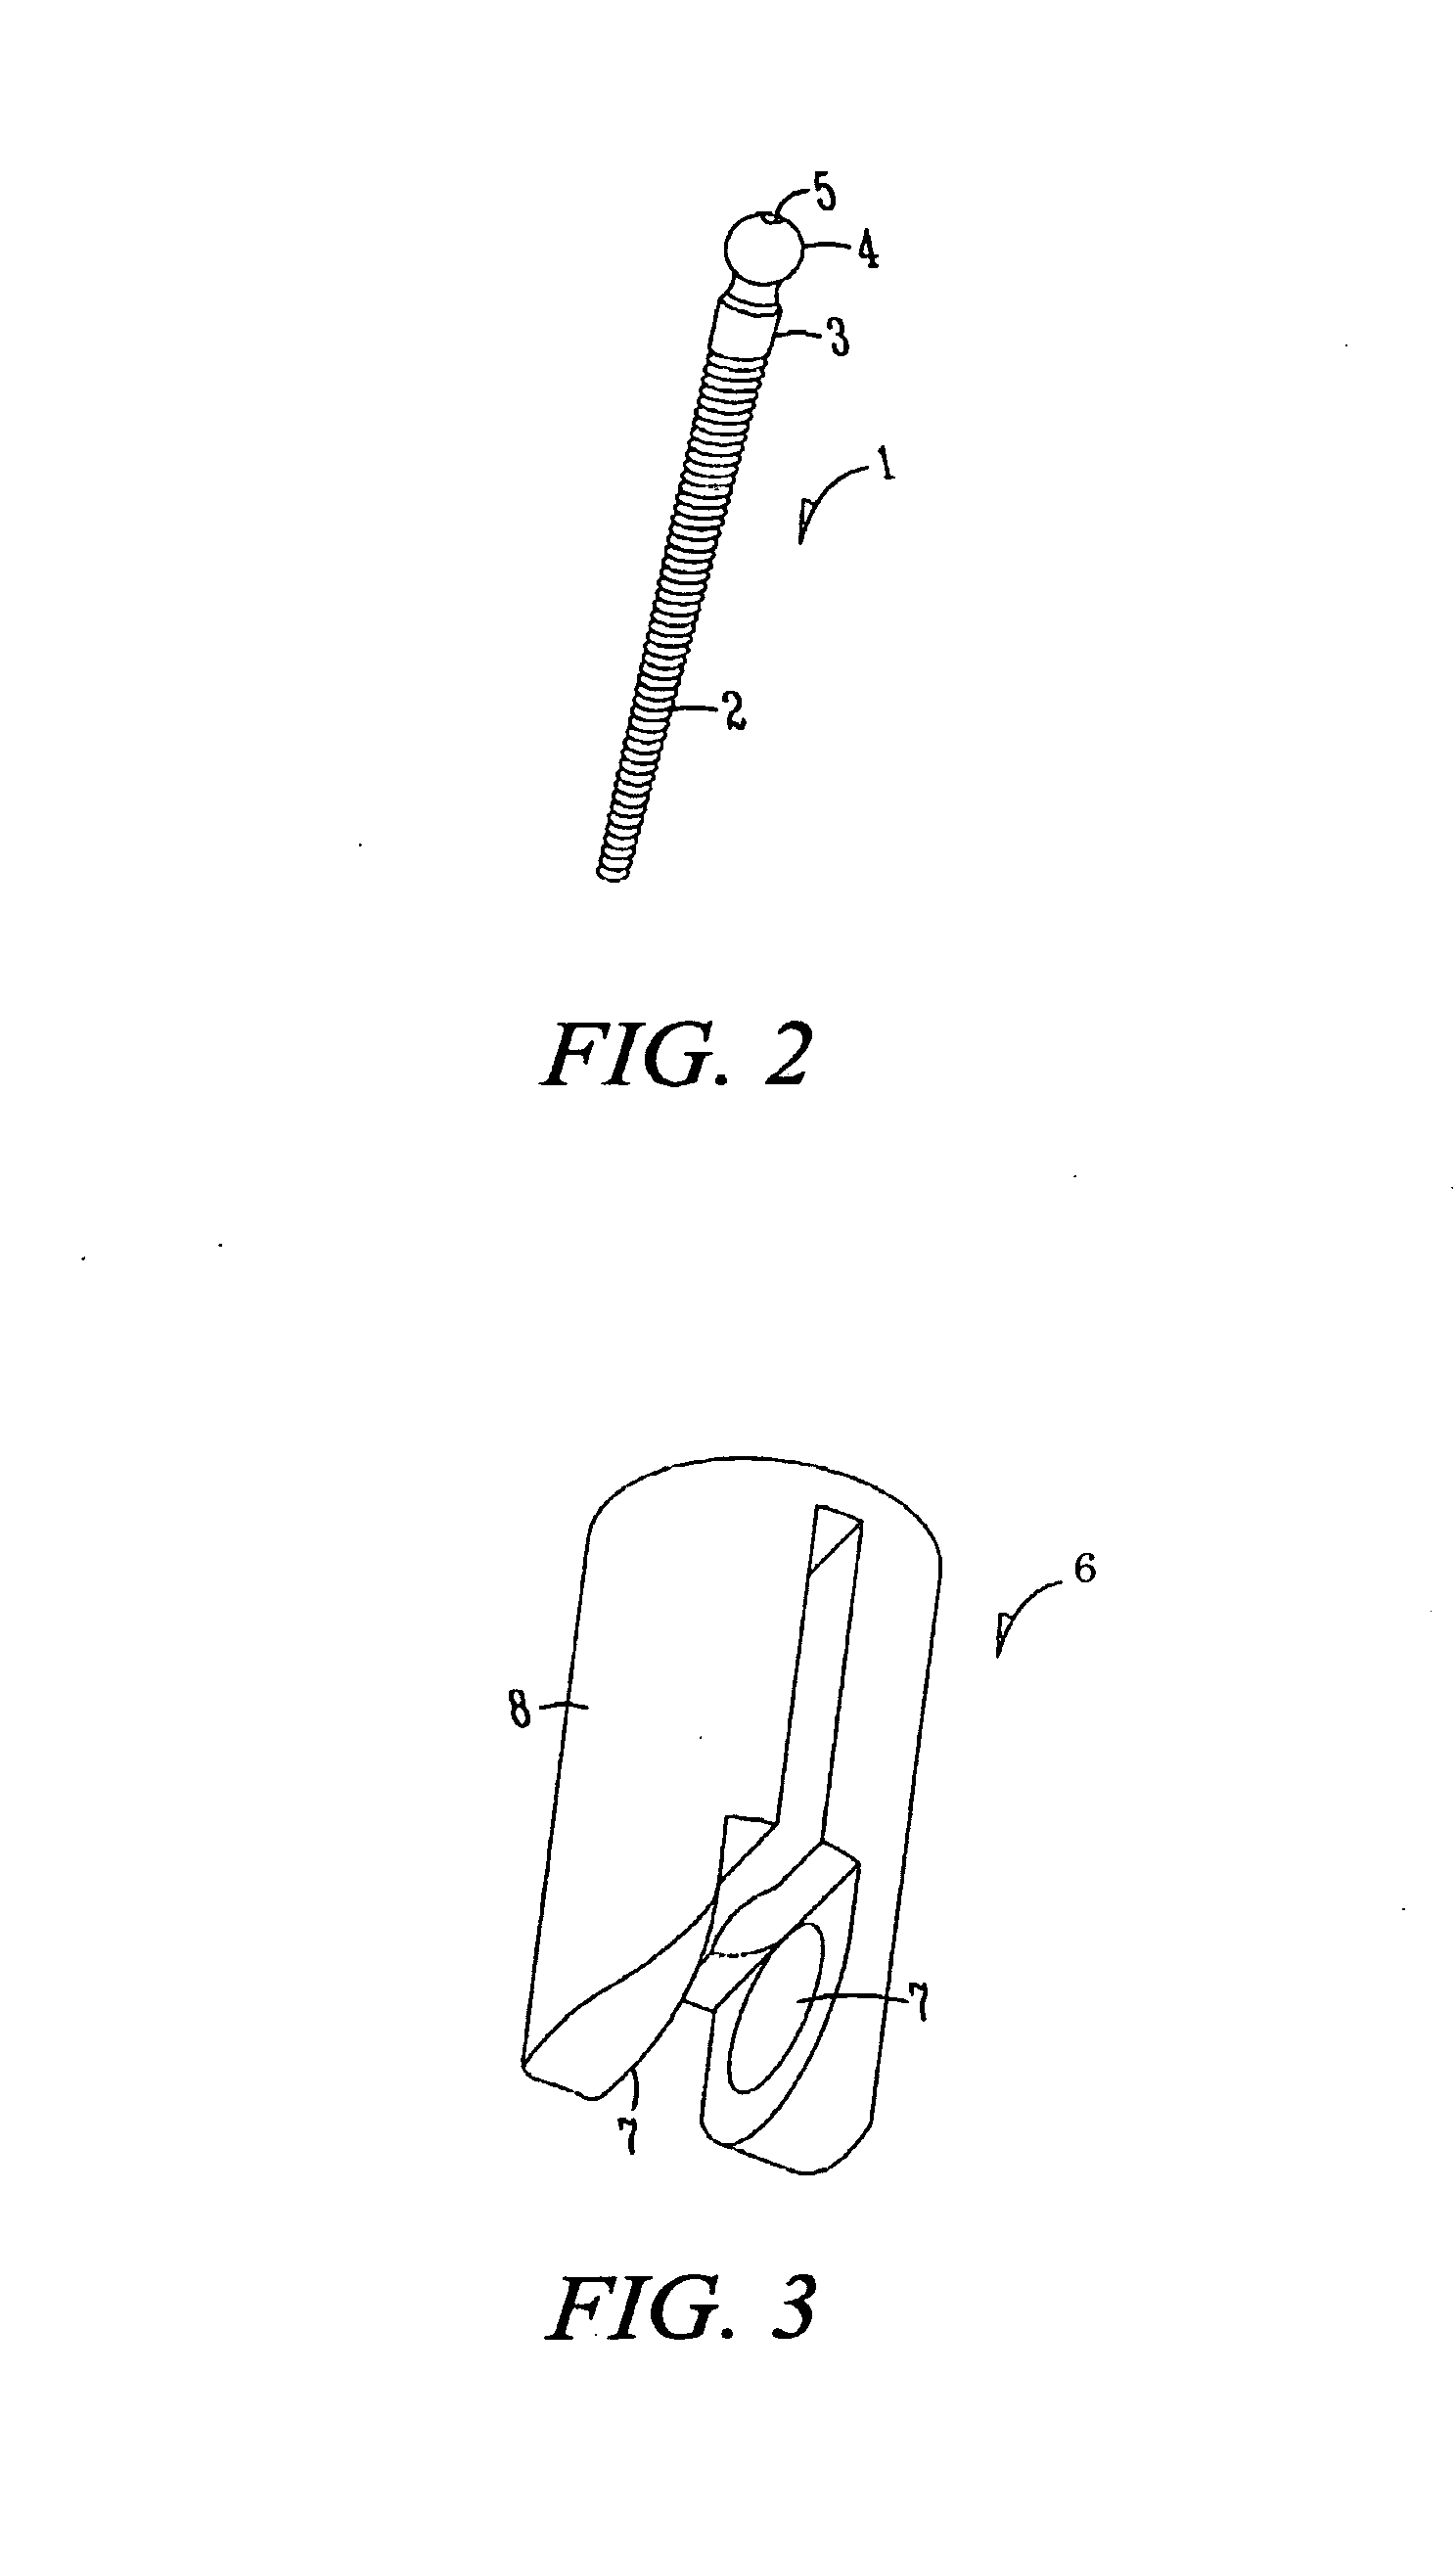 Pedicle screw with vertical adjustment